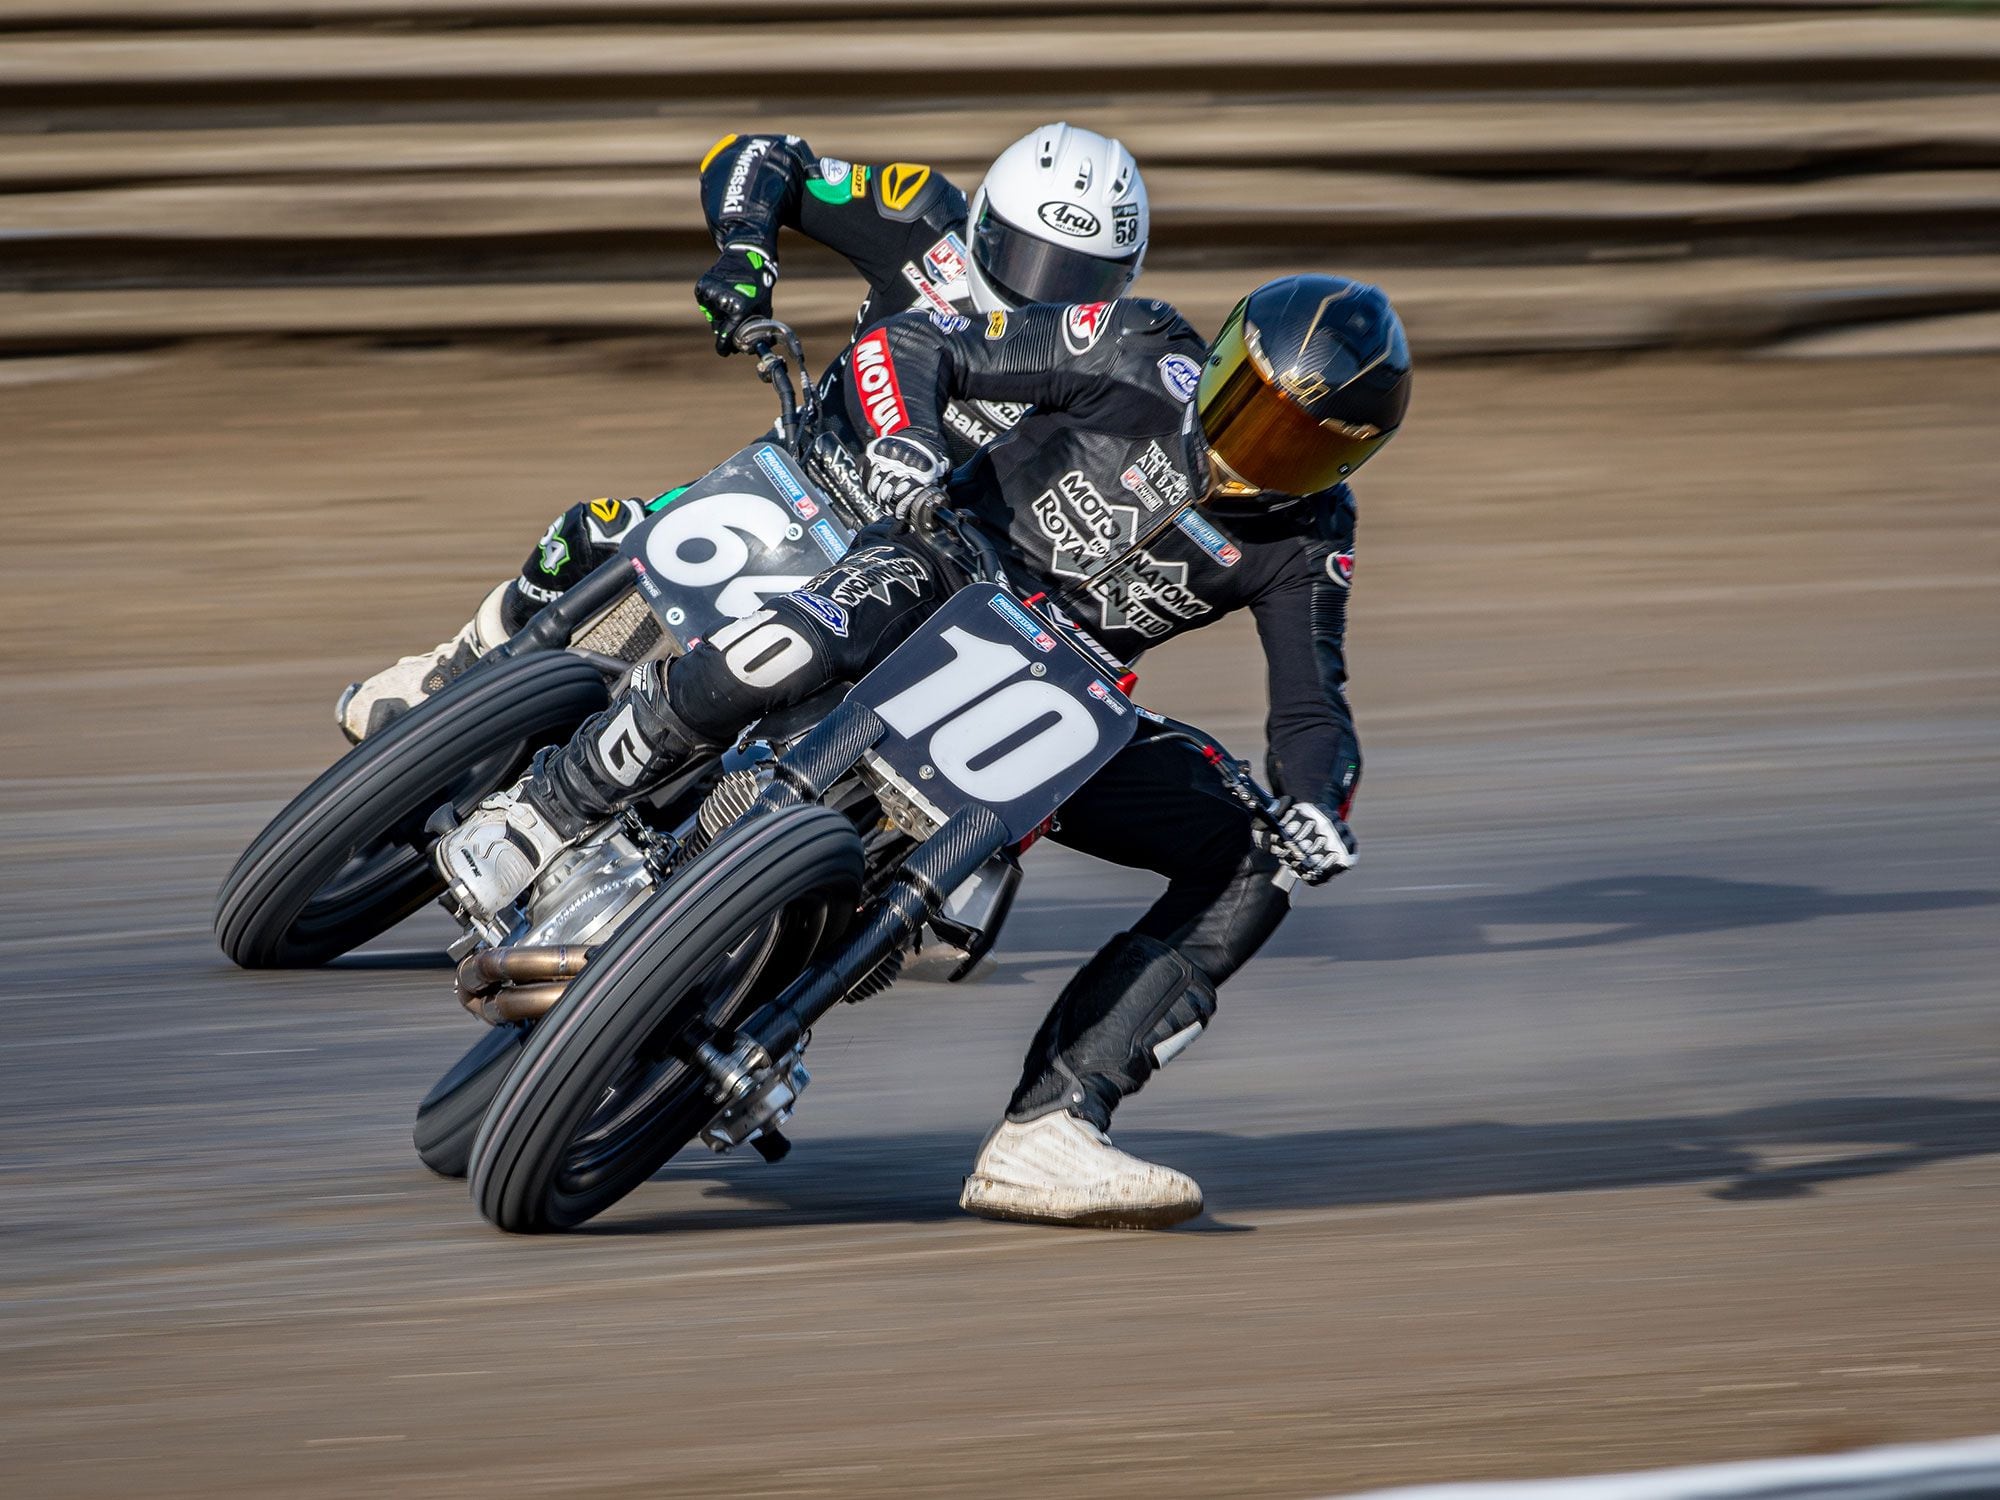 Motorcycle industry veteran and American Flat Track Racing CEO Michael Lock talks shop in this episode of the <em>Motorcyclist</em> Podcast.